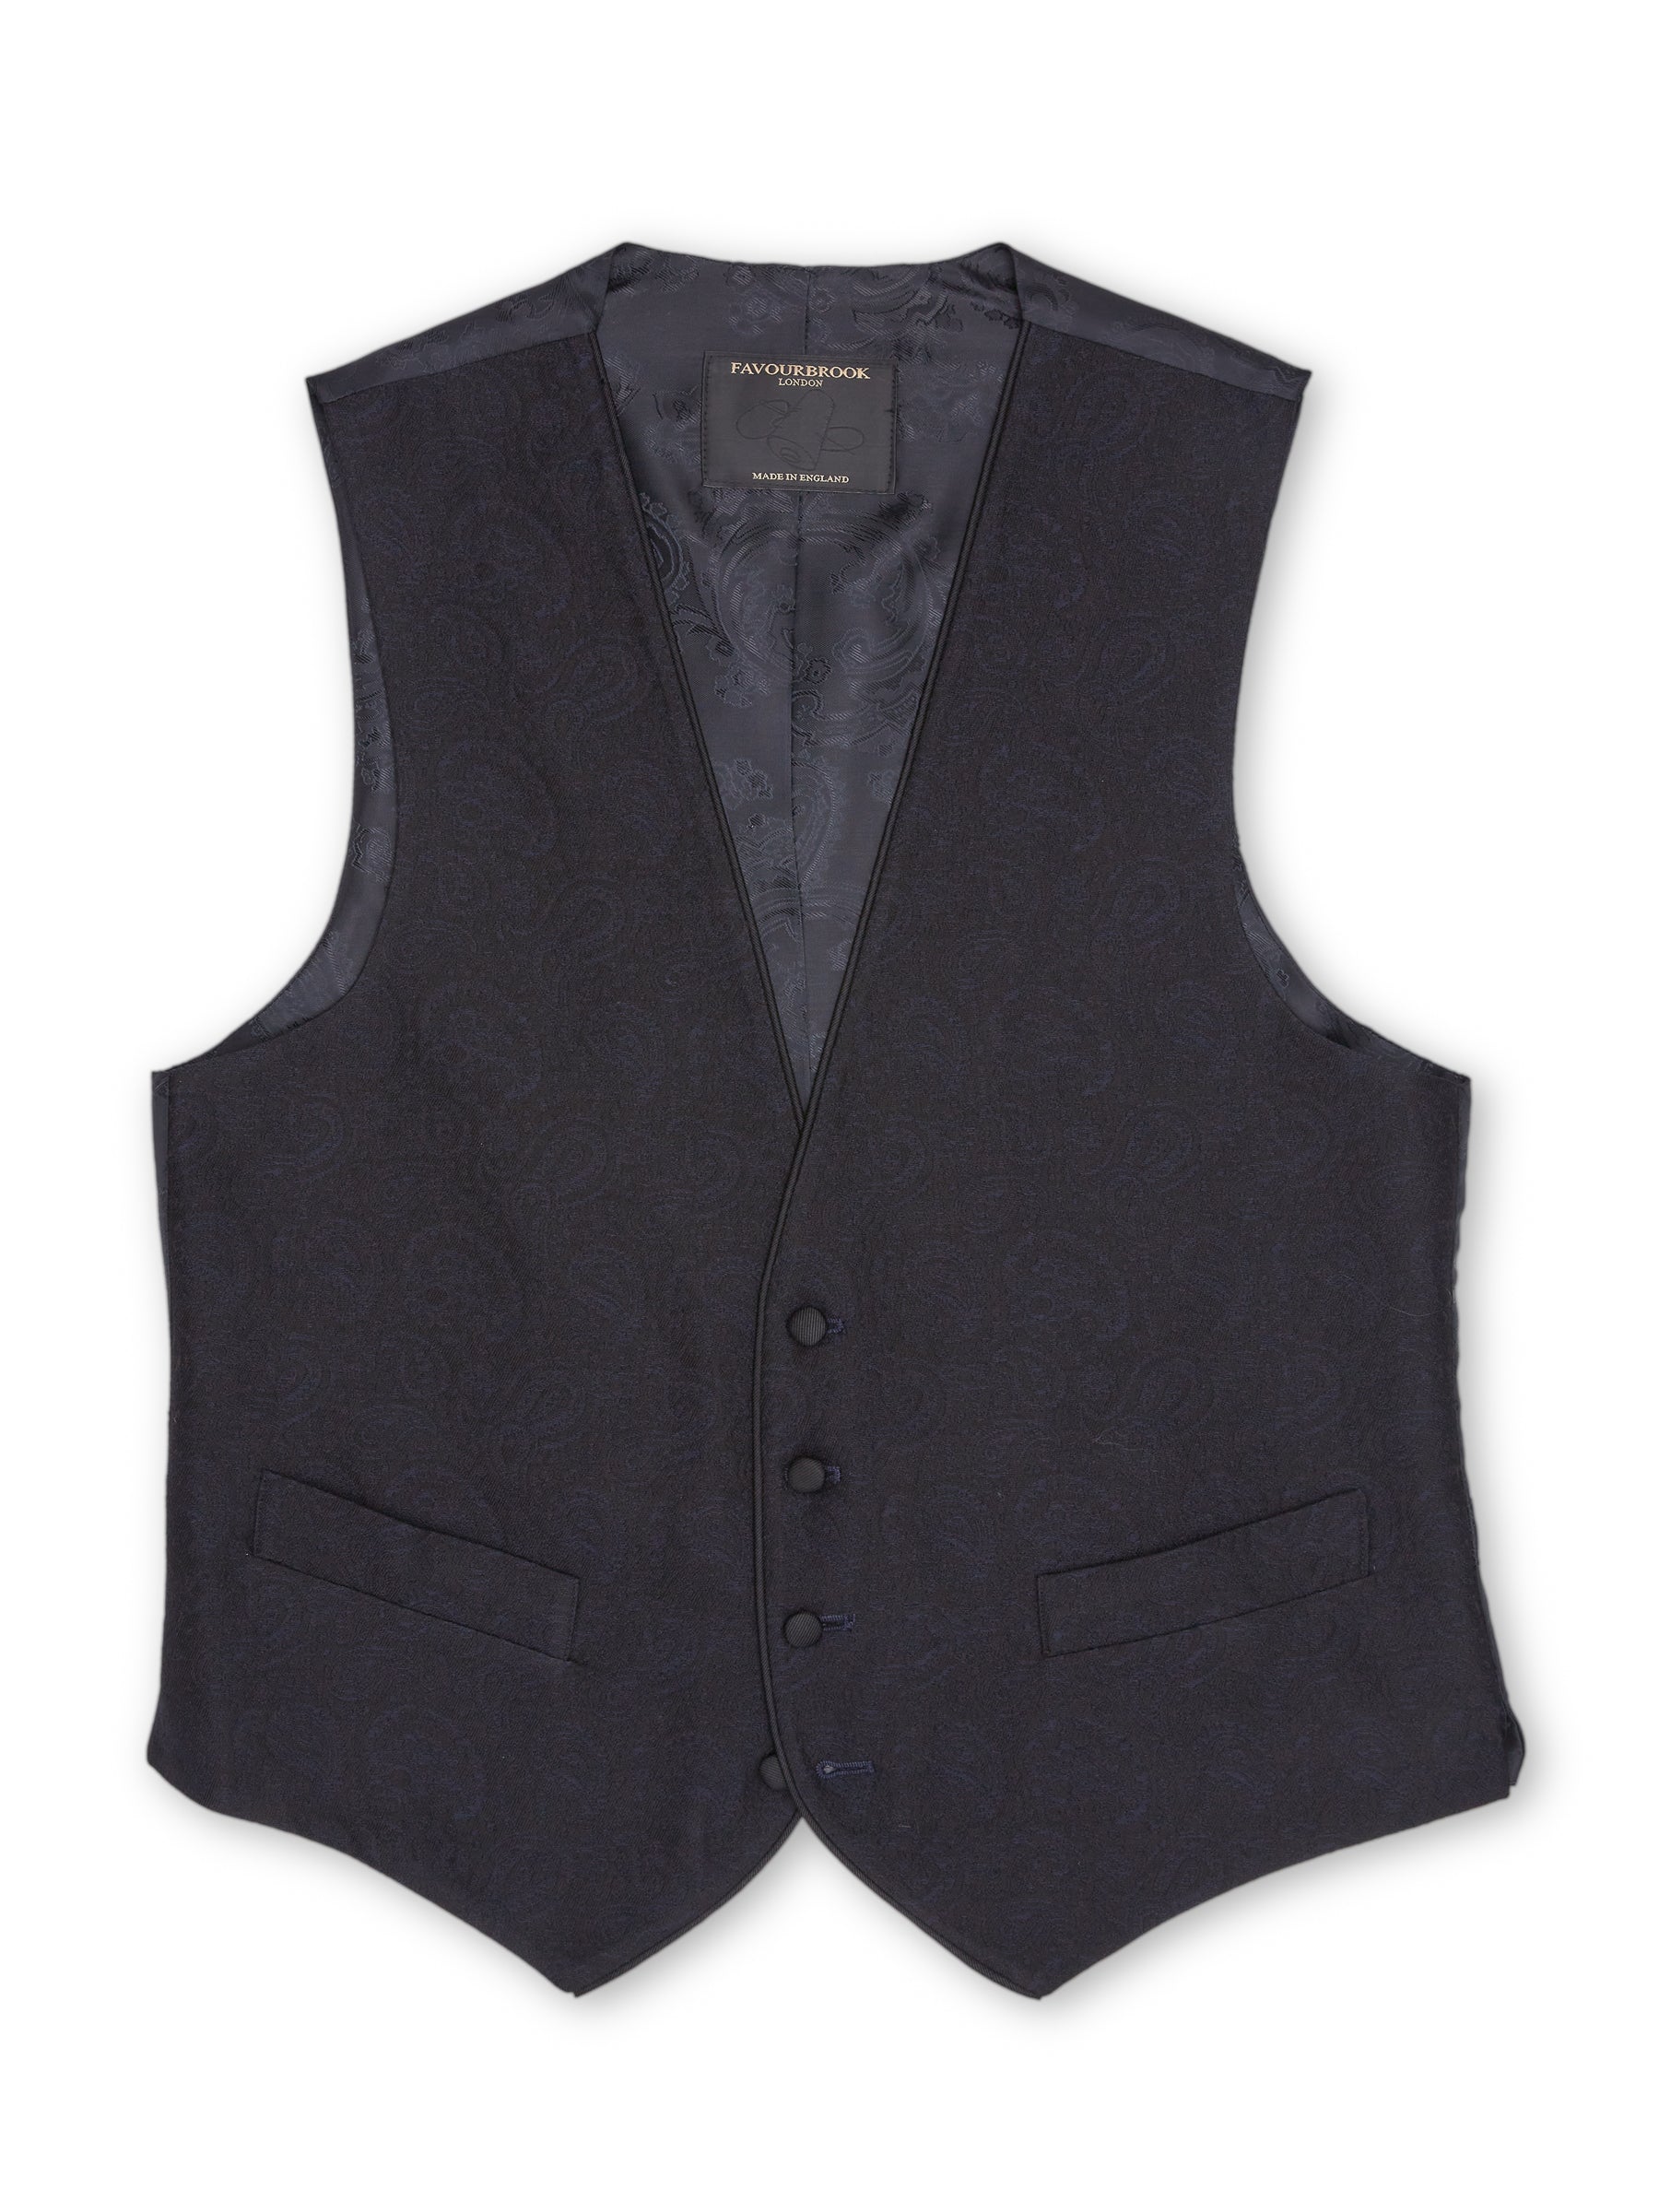 Midnight Vincent Wool Single Breasted 4 Button Piped Waistcoat